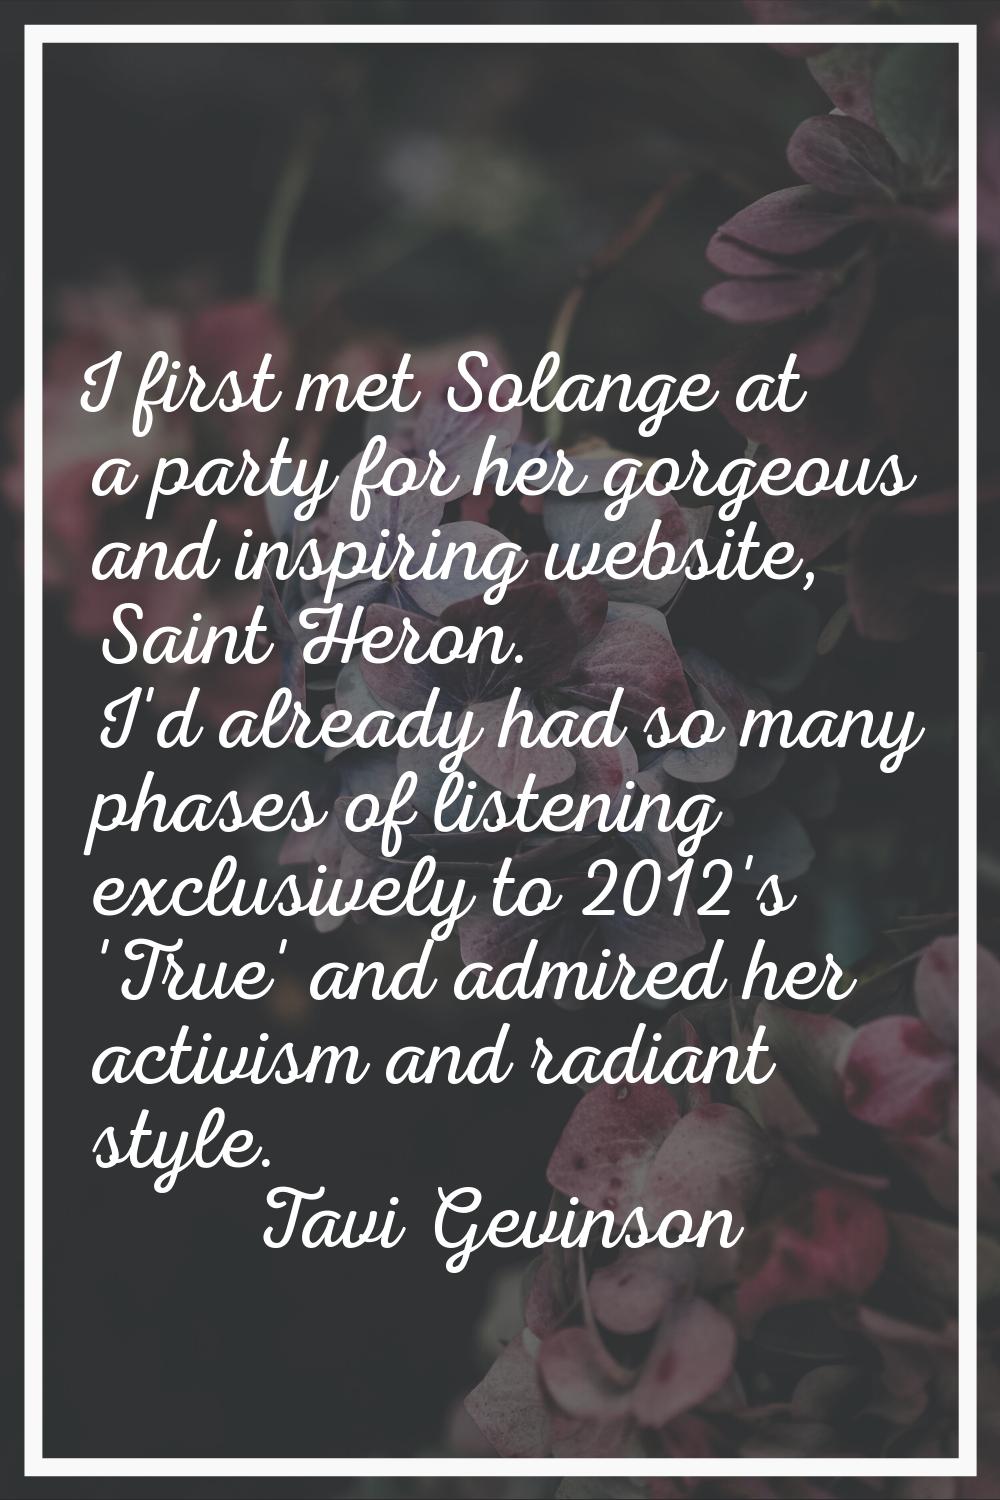 I first met Solange at a party for her gorgeous and inspiring website, Saint Heron. I'd already had